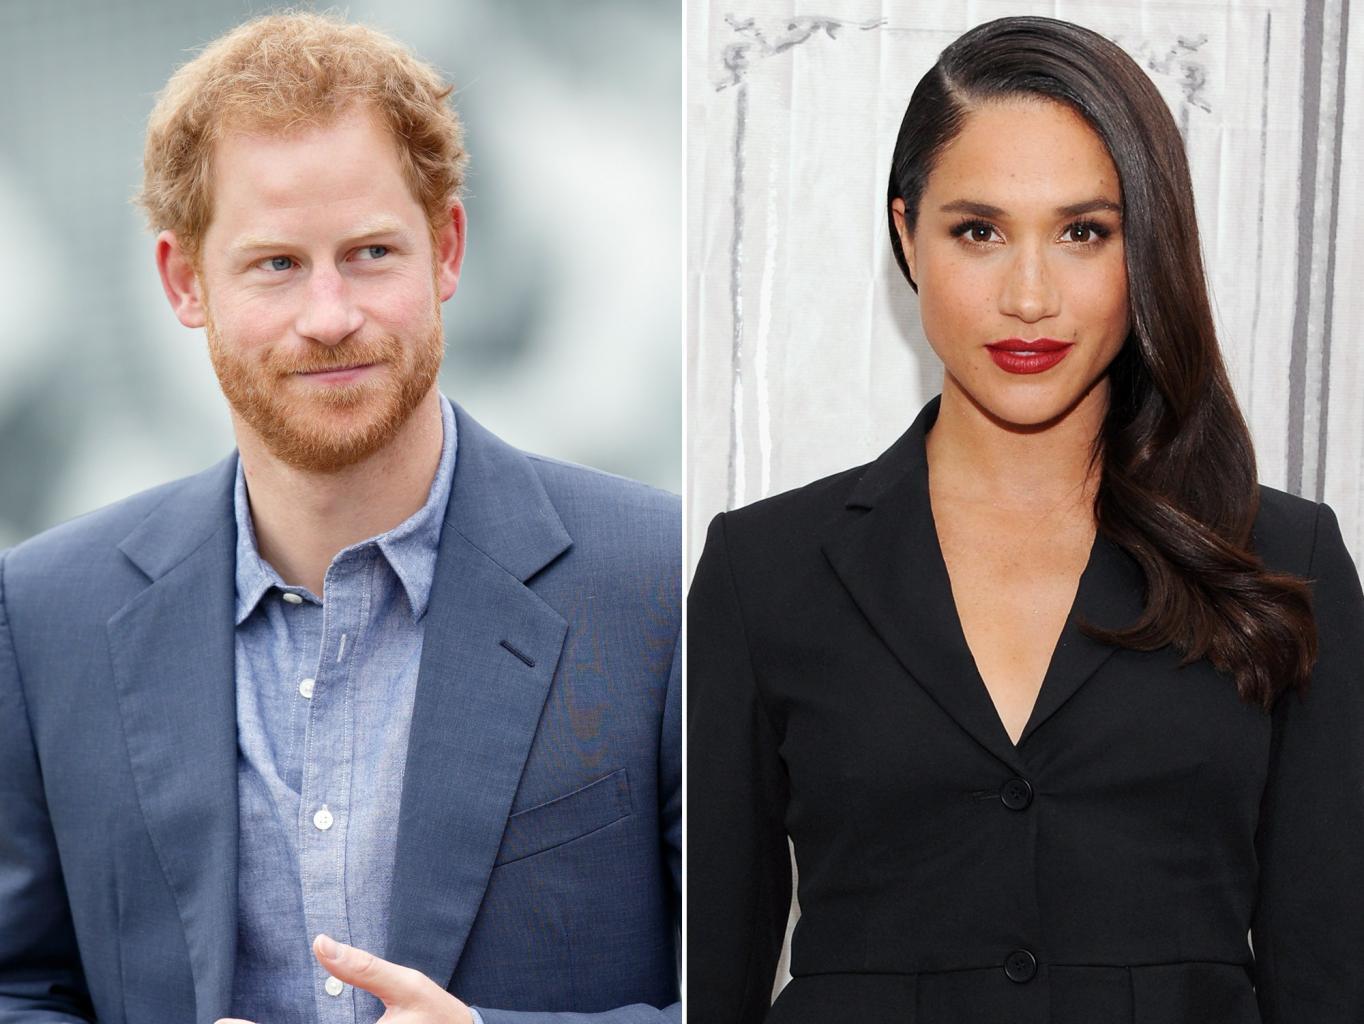 Prince Harry Confirms He Is Dating Meghan Markle as He Defends Her from Racist, Sexist Abuse